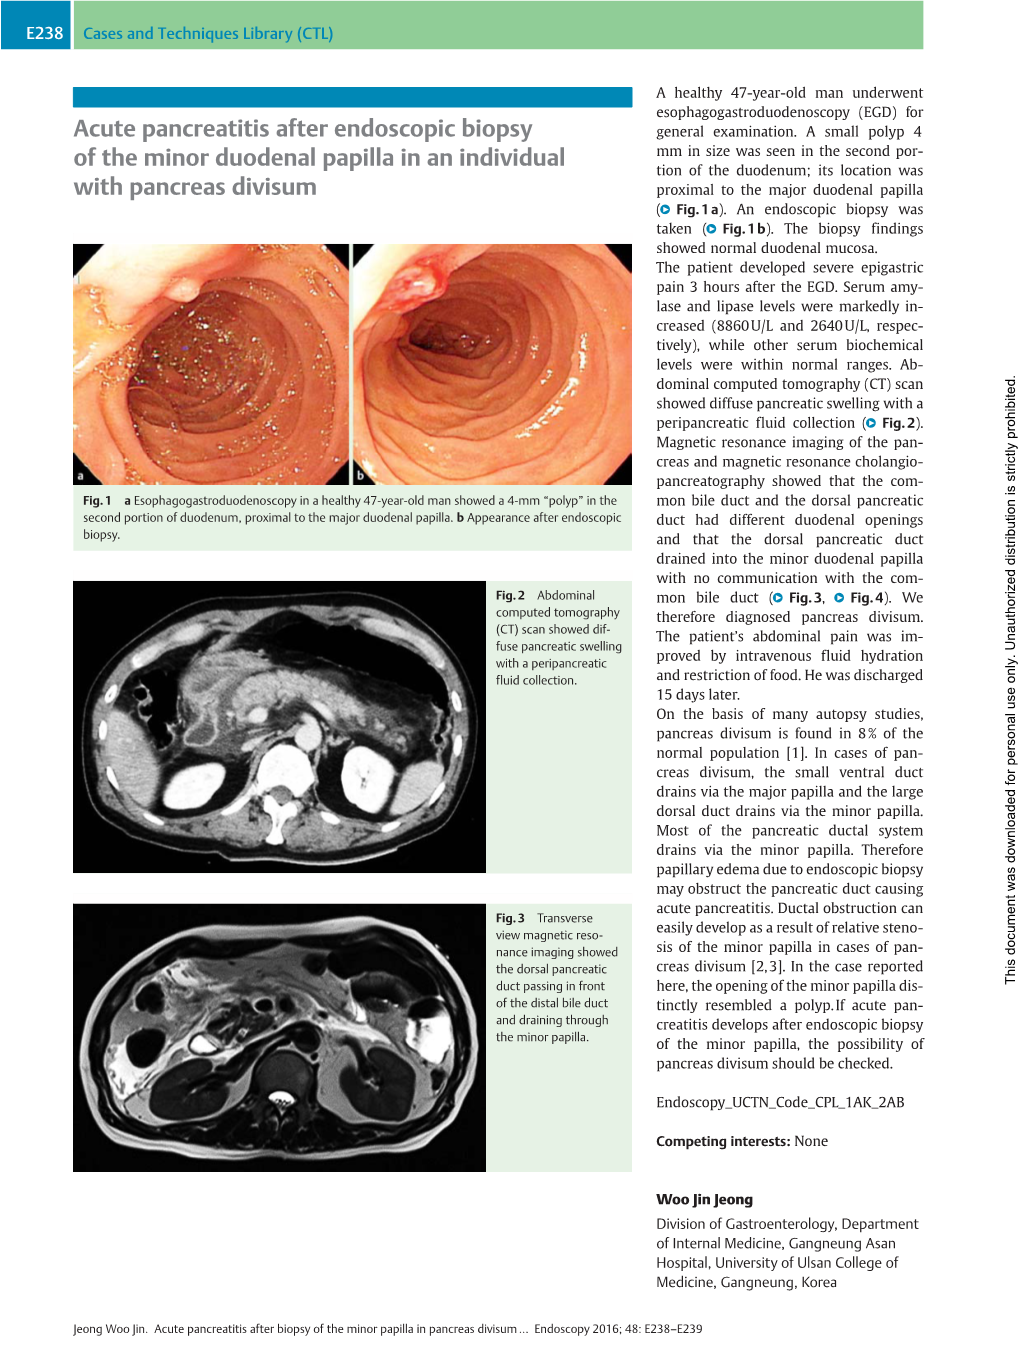 Acute Pancreatitis After Endoscopic Biopsy of the Minor Duodenal